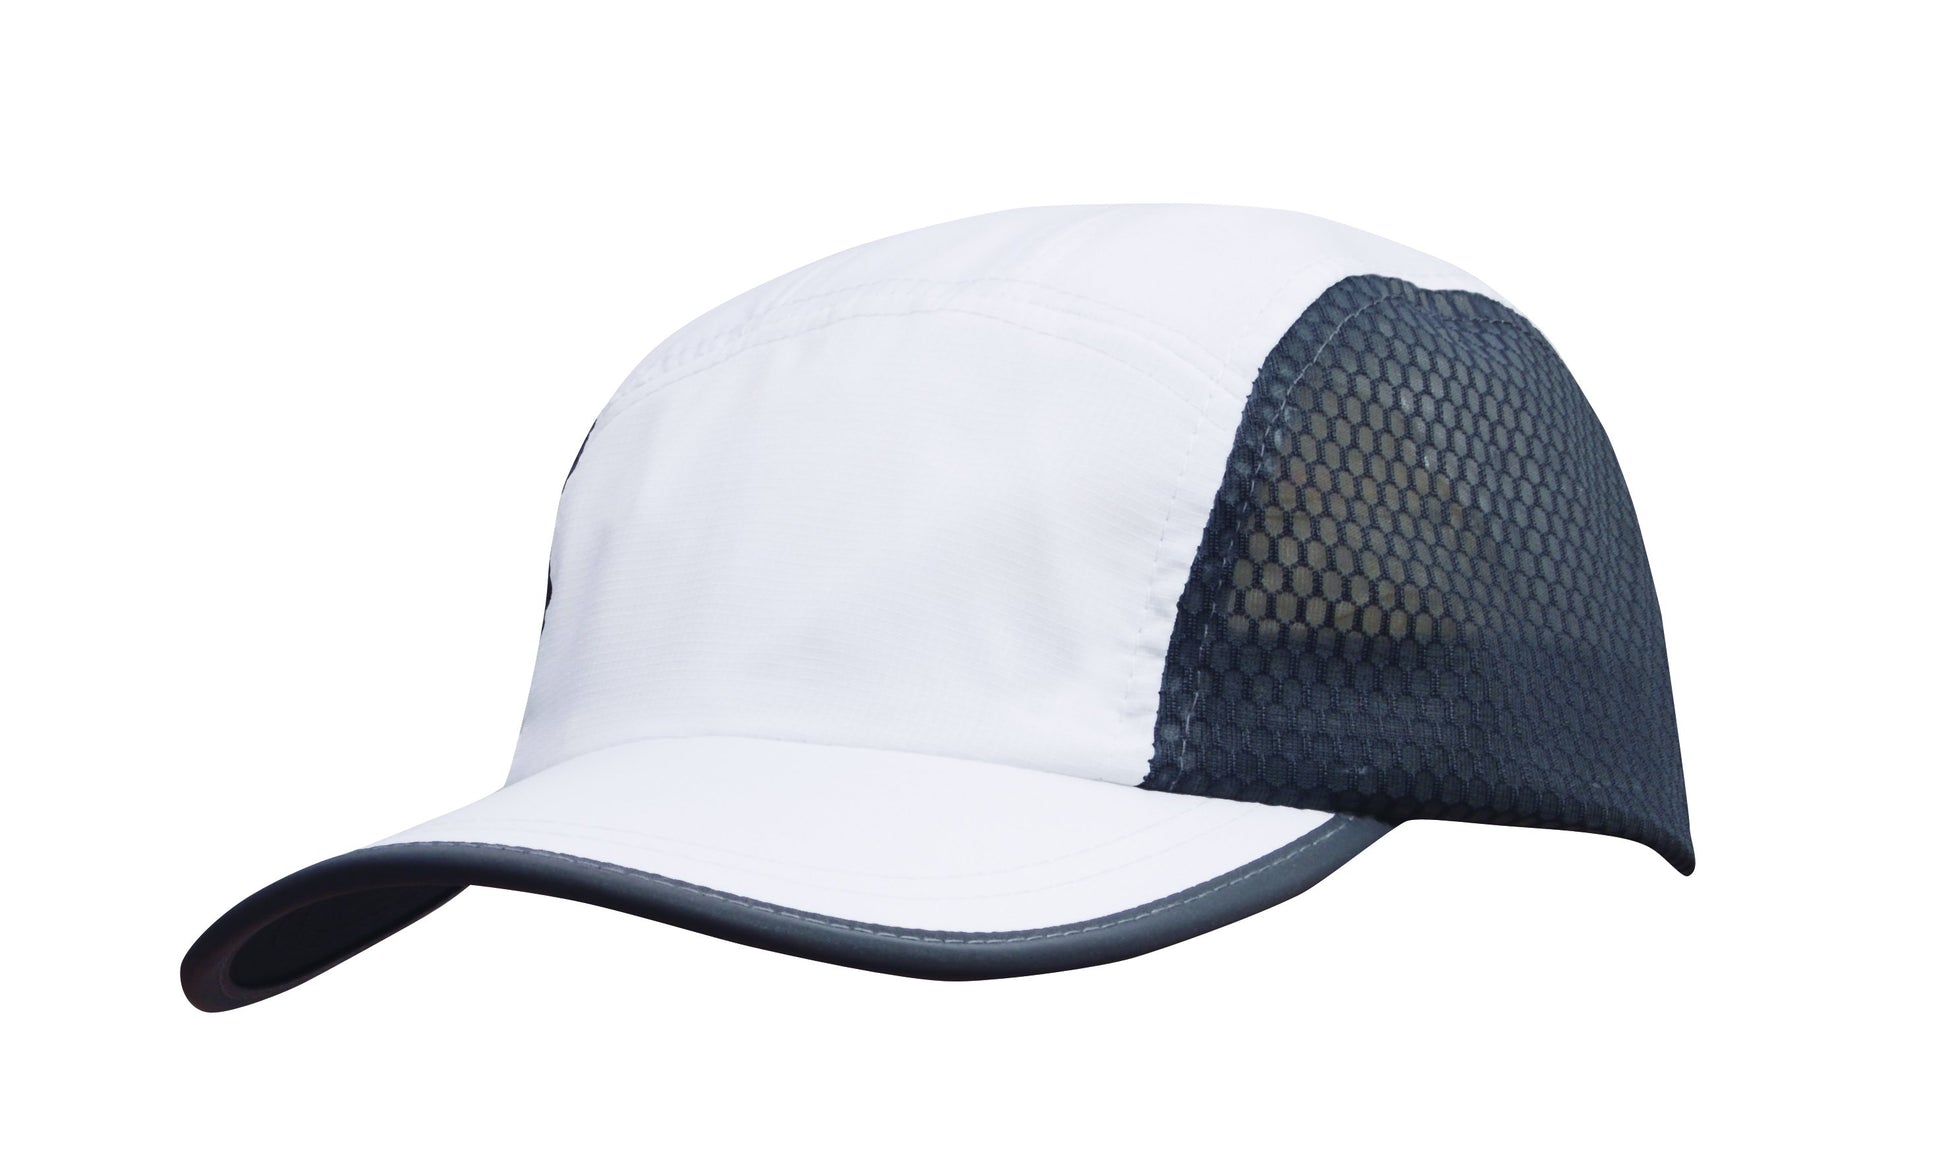 Headwear Sports Ripstop with Bee Hive Mesh and Towelling Sweatband (4003)